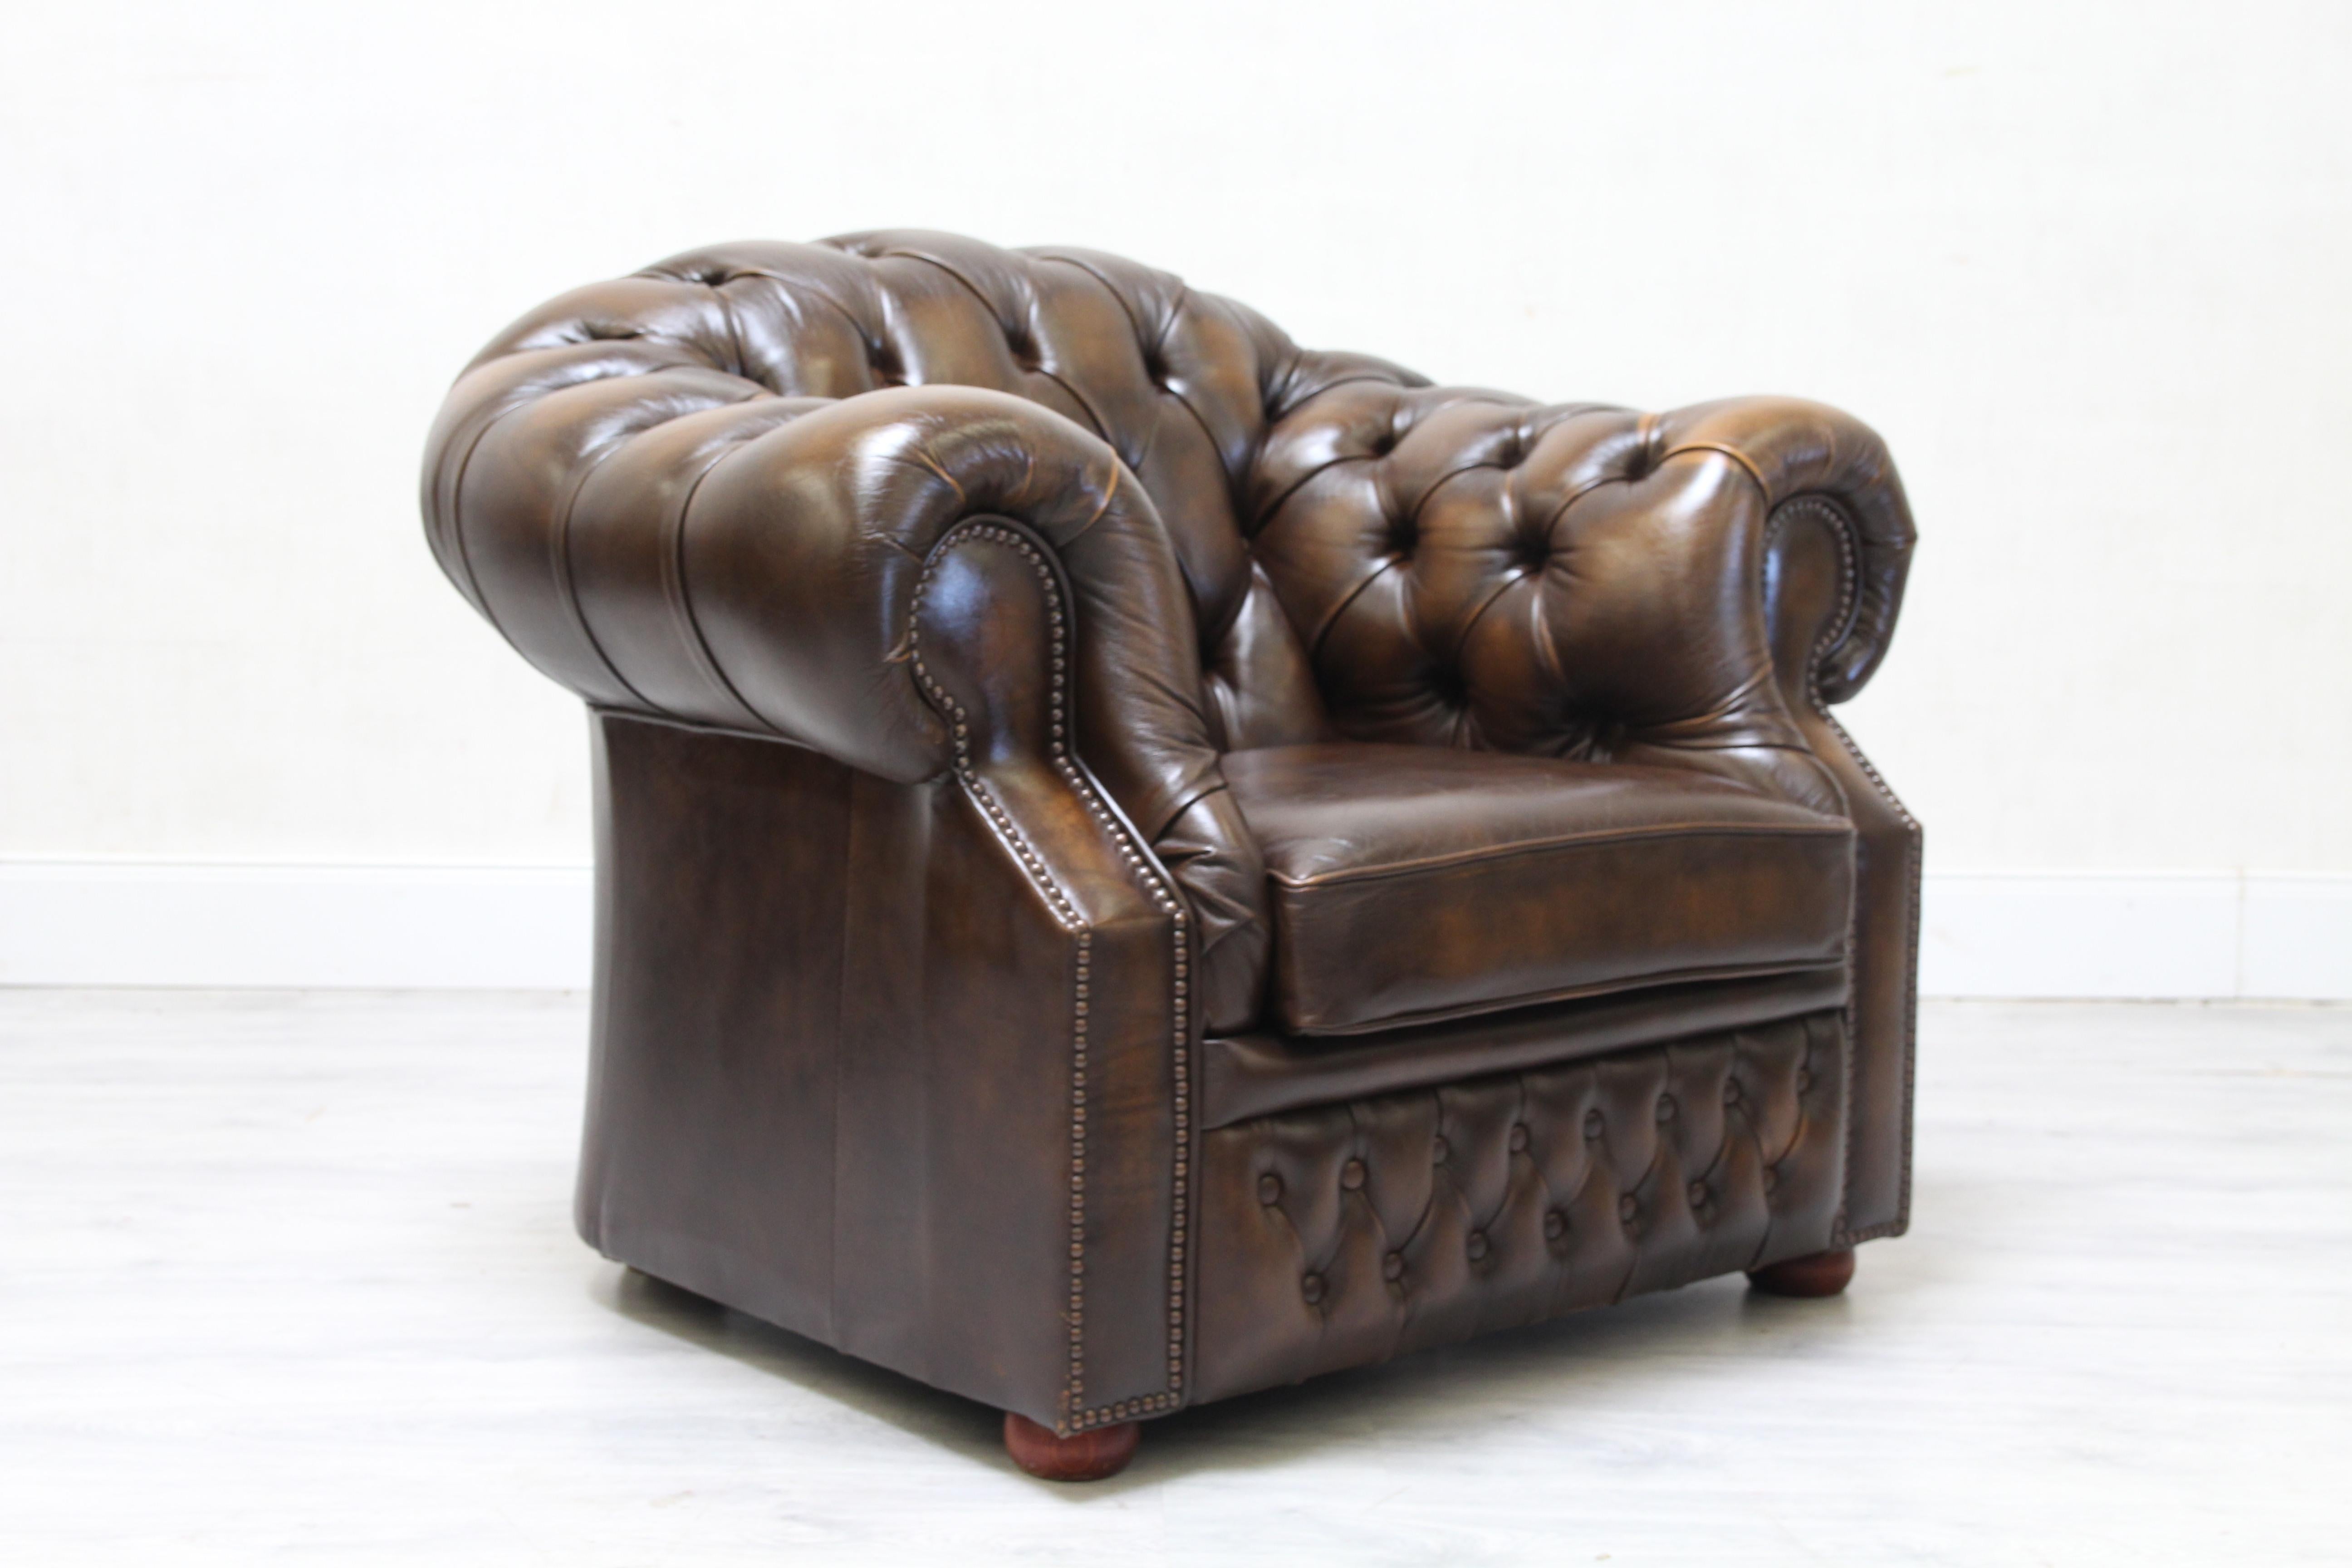 Late 20th Century Chesterfield Armchair Leather Antique Wing Chair Recliner Armchair For Sale